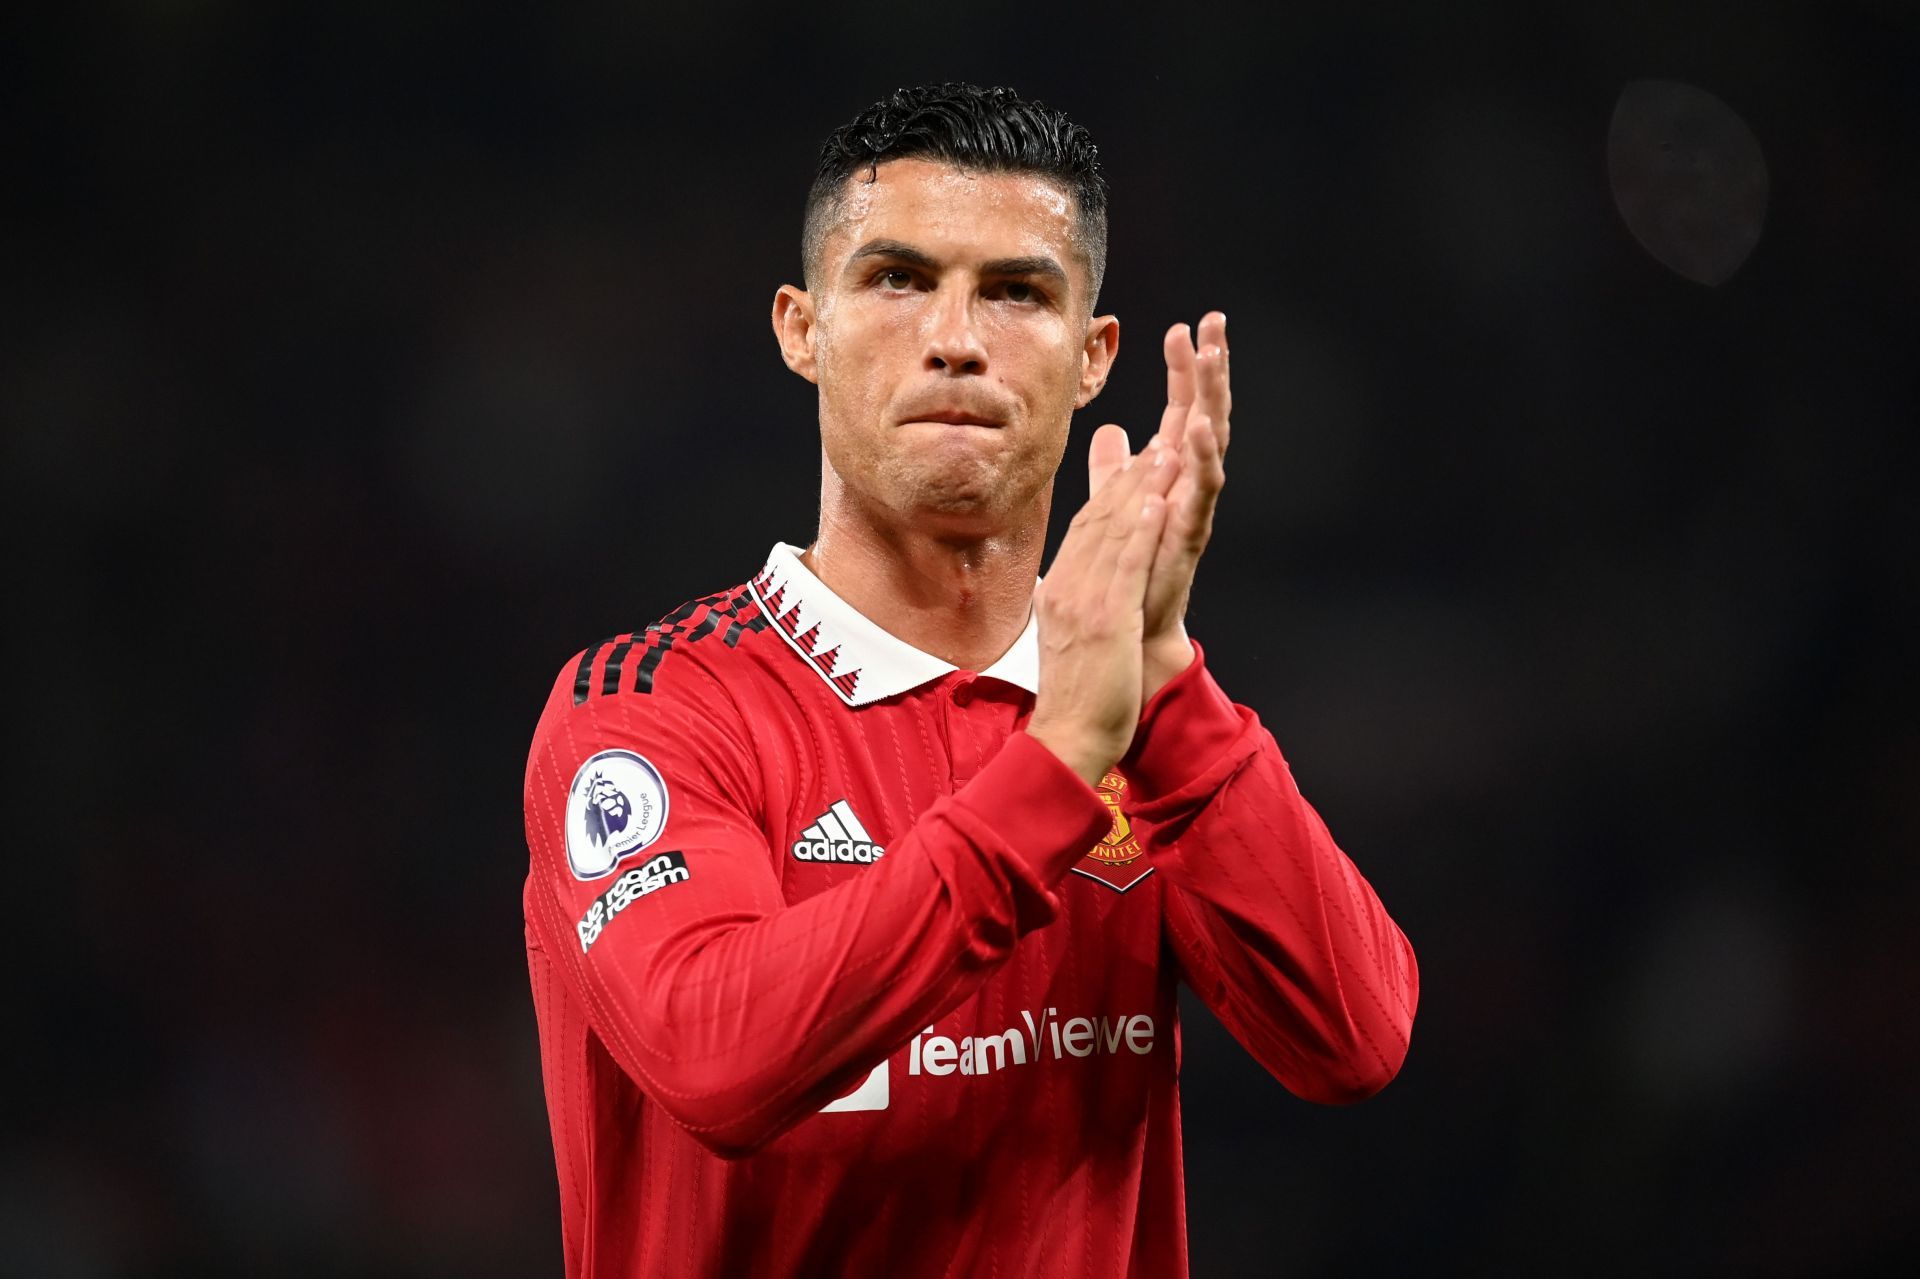 Cristiano Ronaldo returned to Manchester United on a two-year deal in 2021.